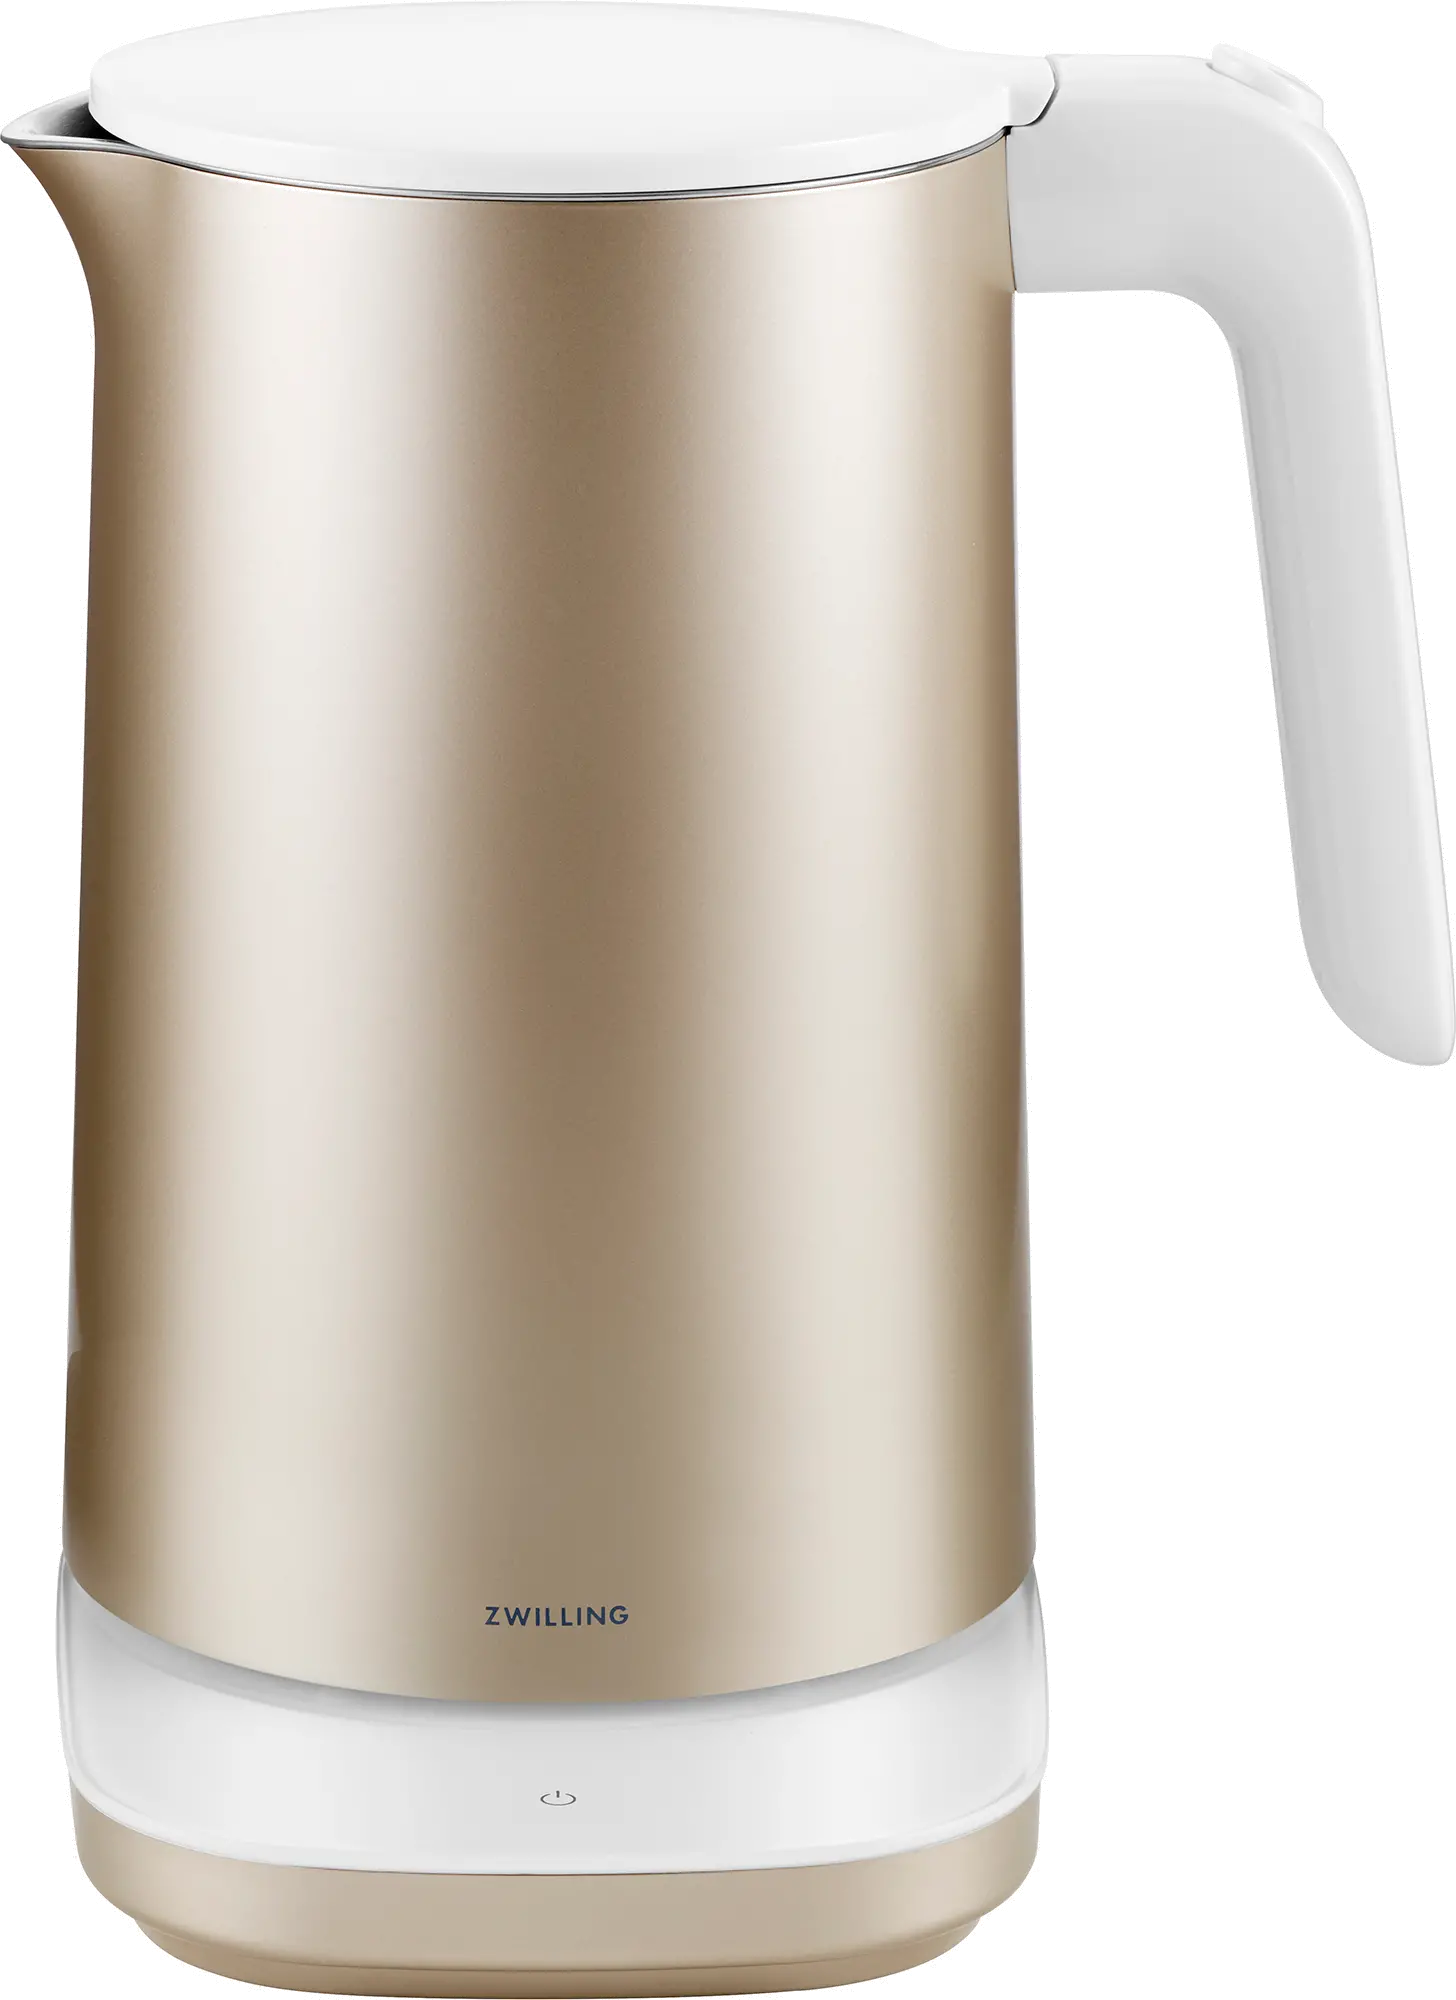 https://static.rcwilley.com/products/112935265/Zwilling-Enfinigy-1.56-qt-Cool-Touch-Stainless-Steel-Electric-Kettle---Gold-rcwilley-image1.webp